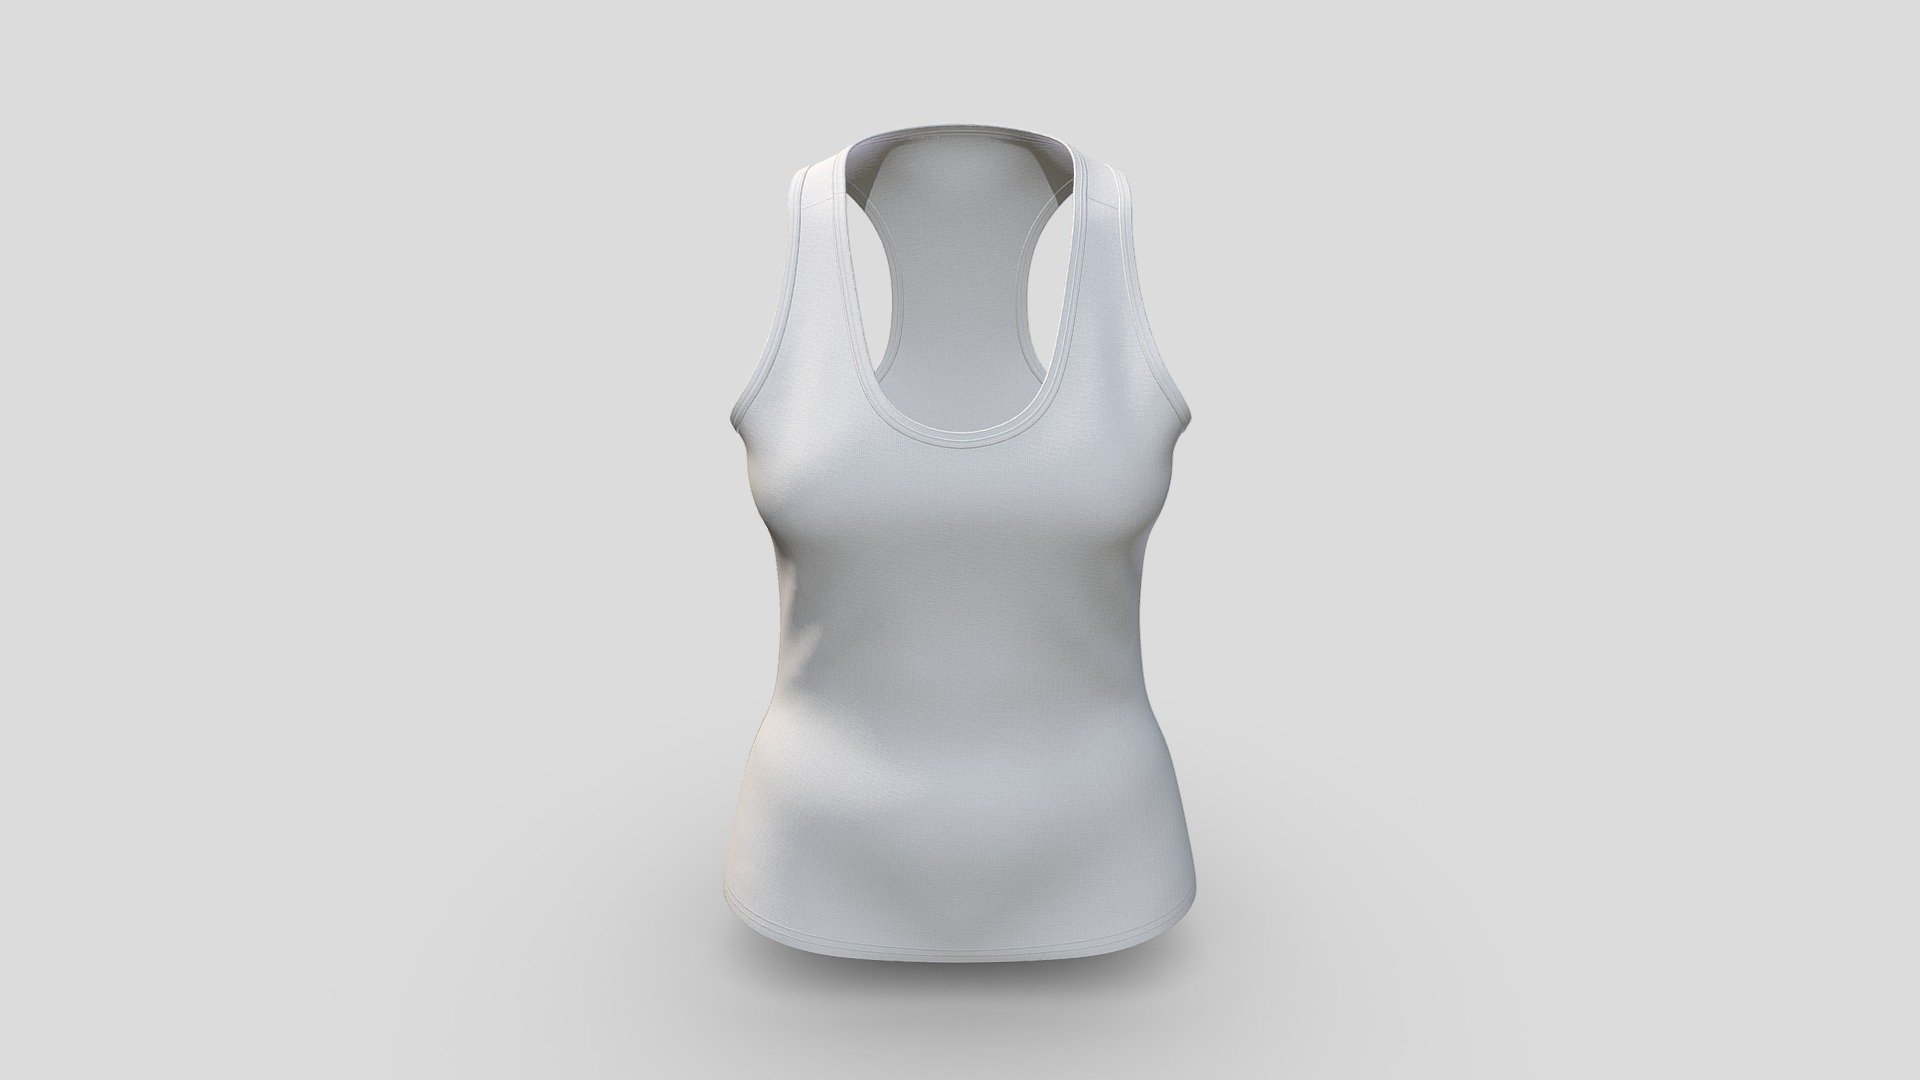 Cloth Title = Classic Women Sport Top Women Workout Tank Top 

SKU = DG100214 

Category = Women 

Product Type = Tank Top 

Cloth Length = Regular 

Body Fit = Fitted  

Occasion = Activewear  


Our Services:

3D Apparel Design.

OBJ,FBX,GLTF Making with High/Low Poly.

Fabric Digitalization.

Mockup making.

3D Teck Pack.

Pattern Making.

2D Illustration.

Cloth Animation and 360 Spin Video.


Contact us:- 

Email: info@digitalfashionwear.com 

Website: https://digitalfashionwear.com 


We designed all the types of cloth specially focused on product visualization, e-commerce, fitting, and production. 

We will design: 

T-shirts 

Polo shirts 

Hoodies 

Sweatshirt 

Jackets 

Shirts 

TankTops 

Trousers 

Bras 

Underwear 

Blazer 

Aprons 

Leggings 

and All Fashion items. 





Our goal is to make sure what we provide you, meets your demand 3d model